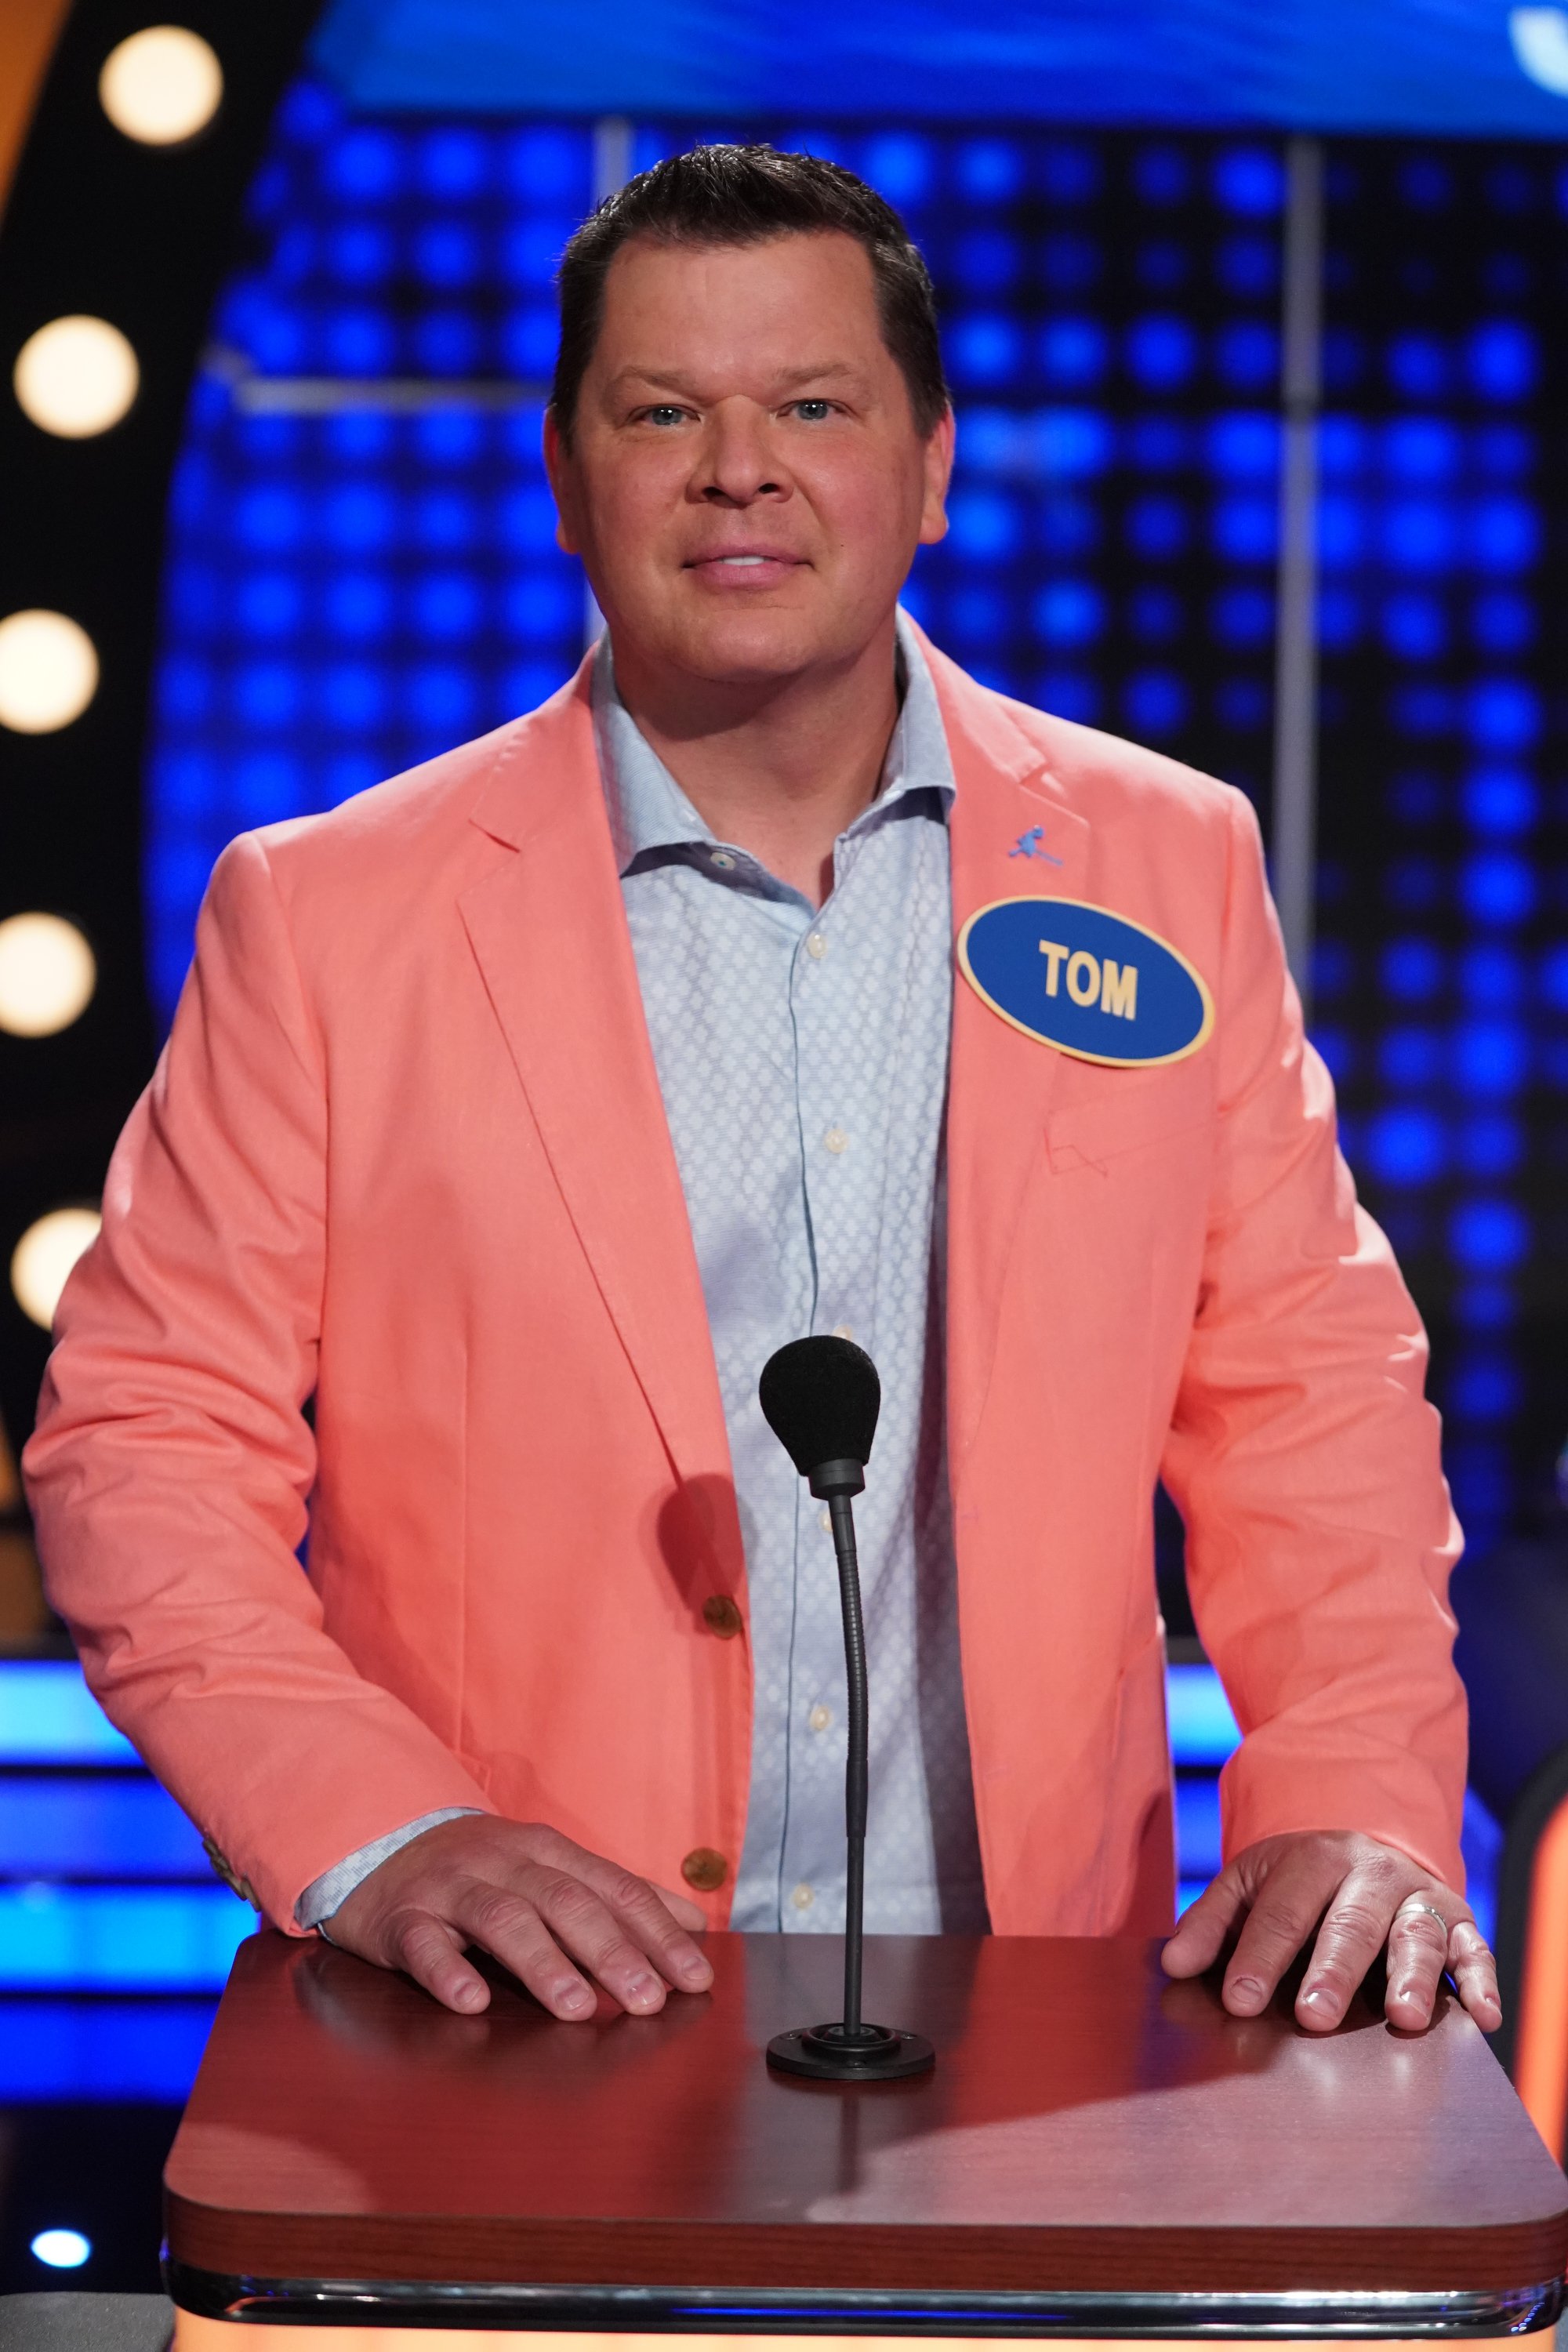 JoJo Siwa vs. The DAmelio Family at Celebrity Family Fued | Source: GettyImages.